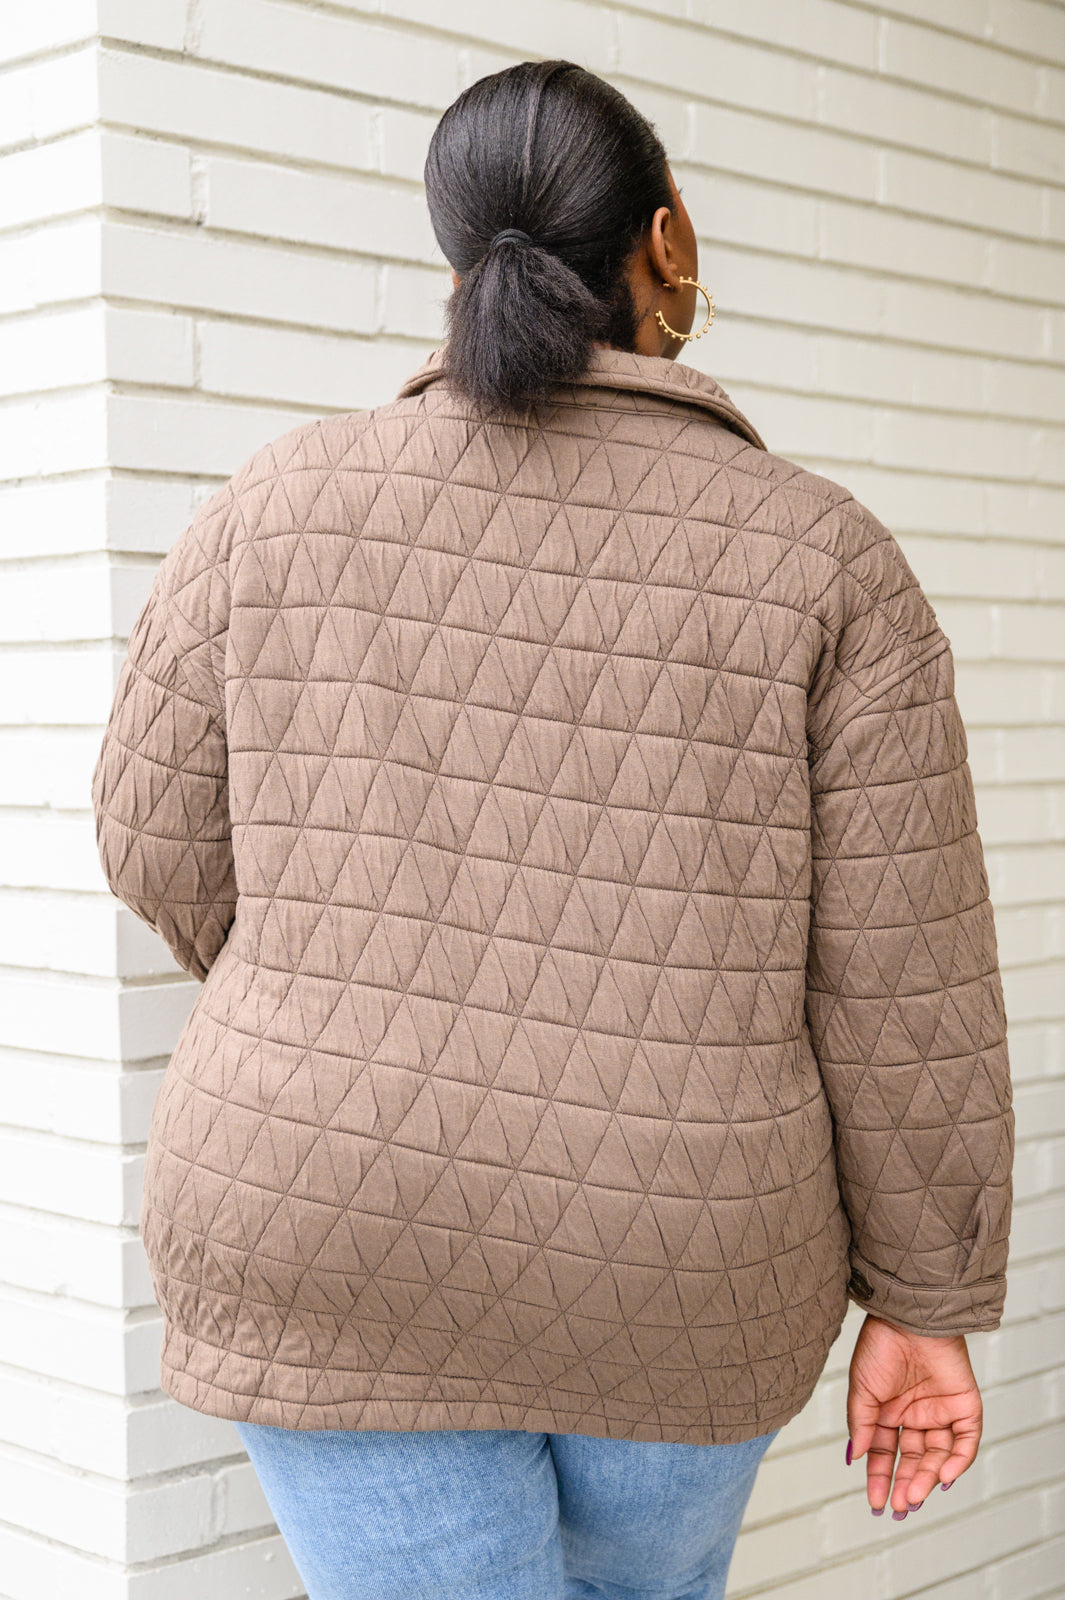 Coming Back Home Jacket in Mocha - 12/20/2022